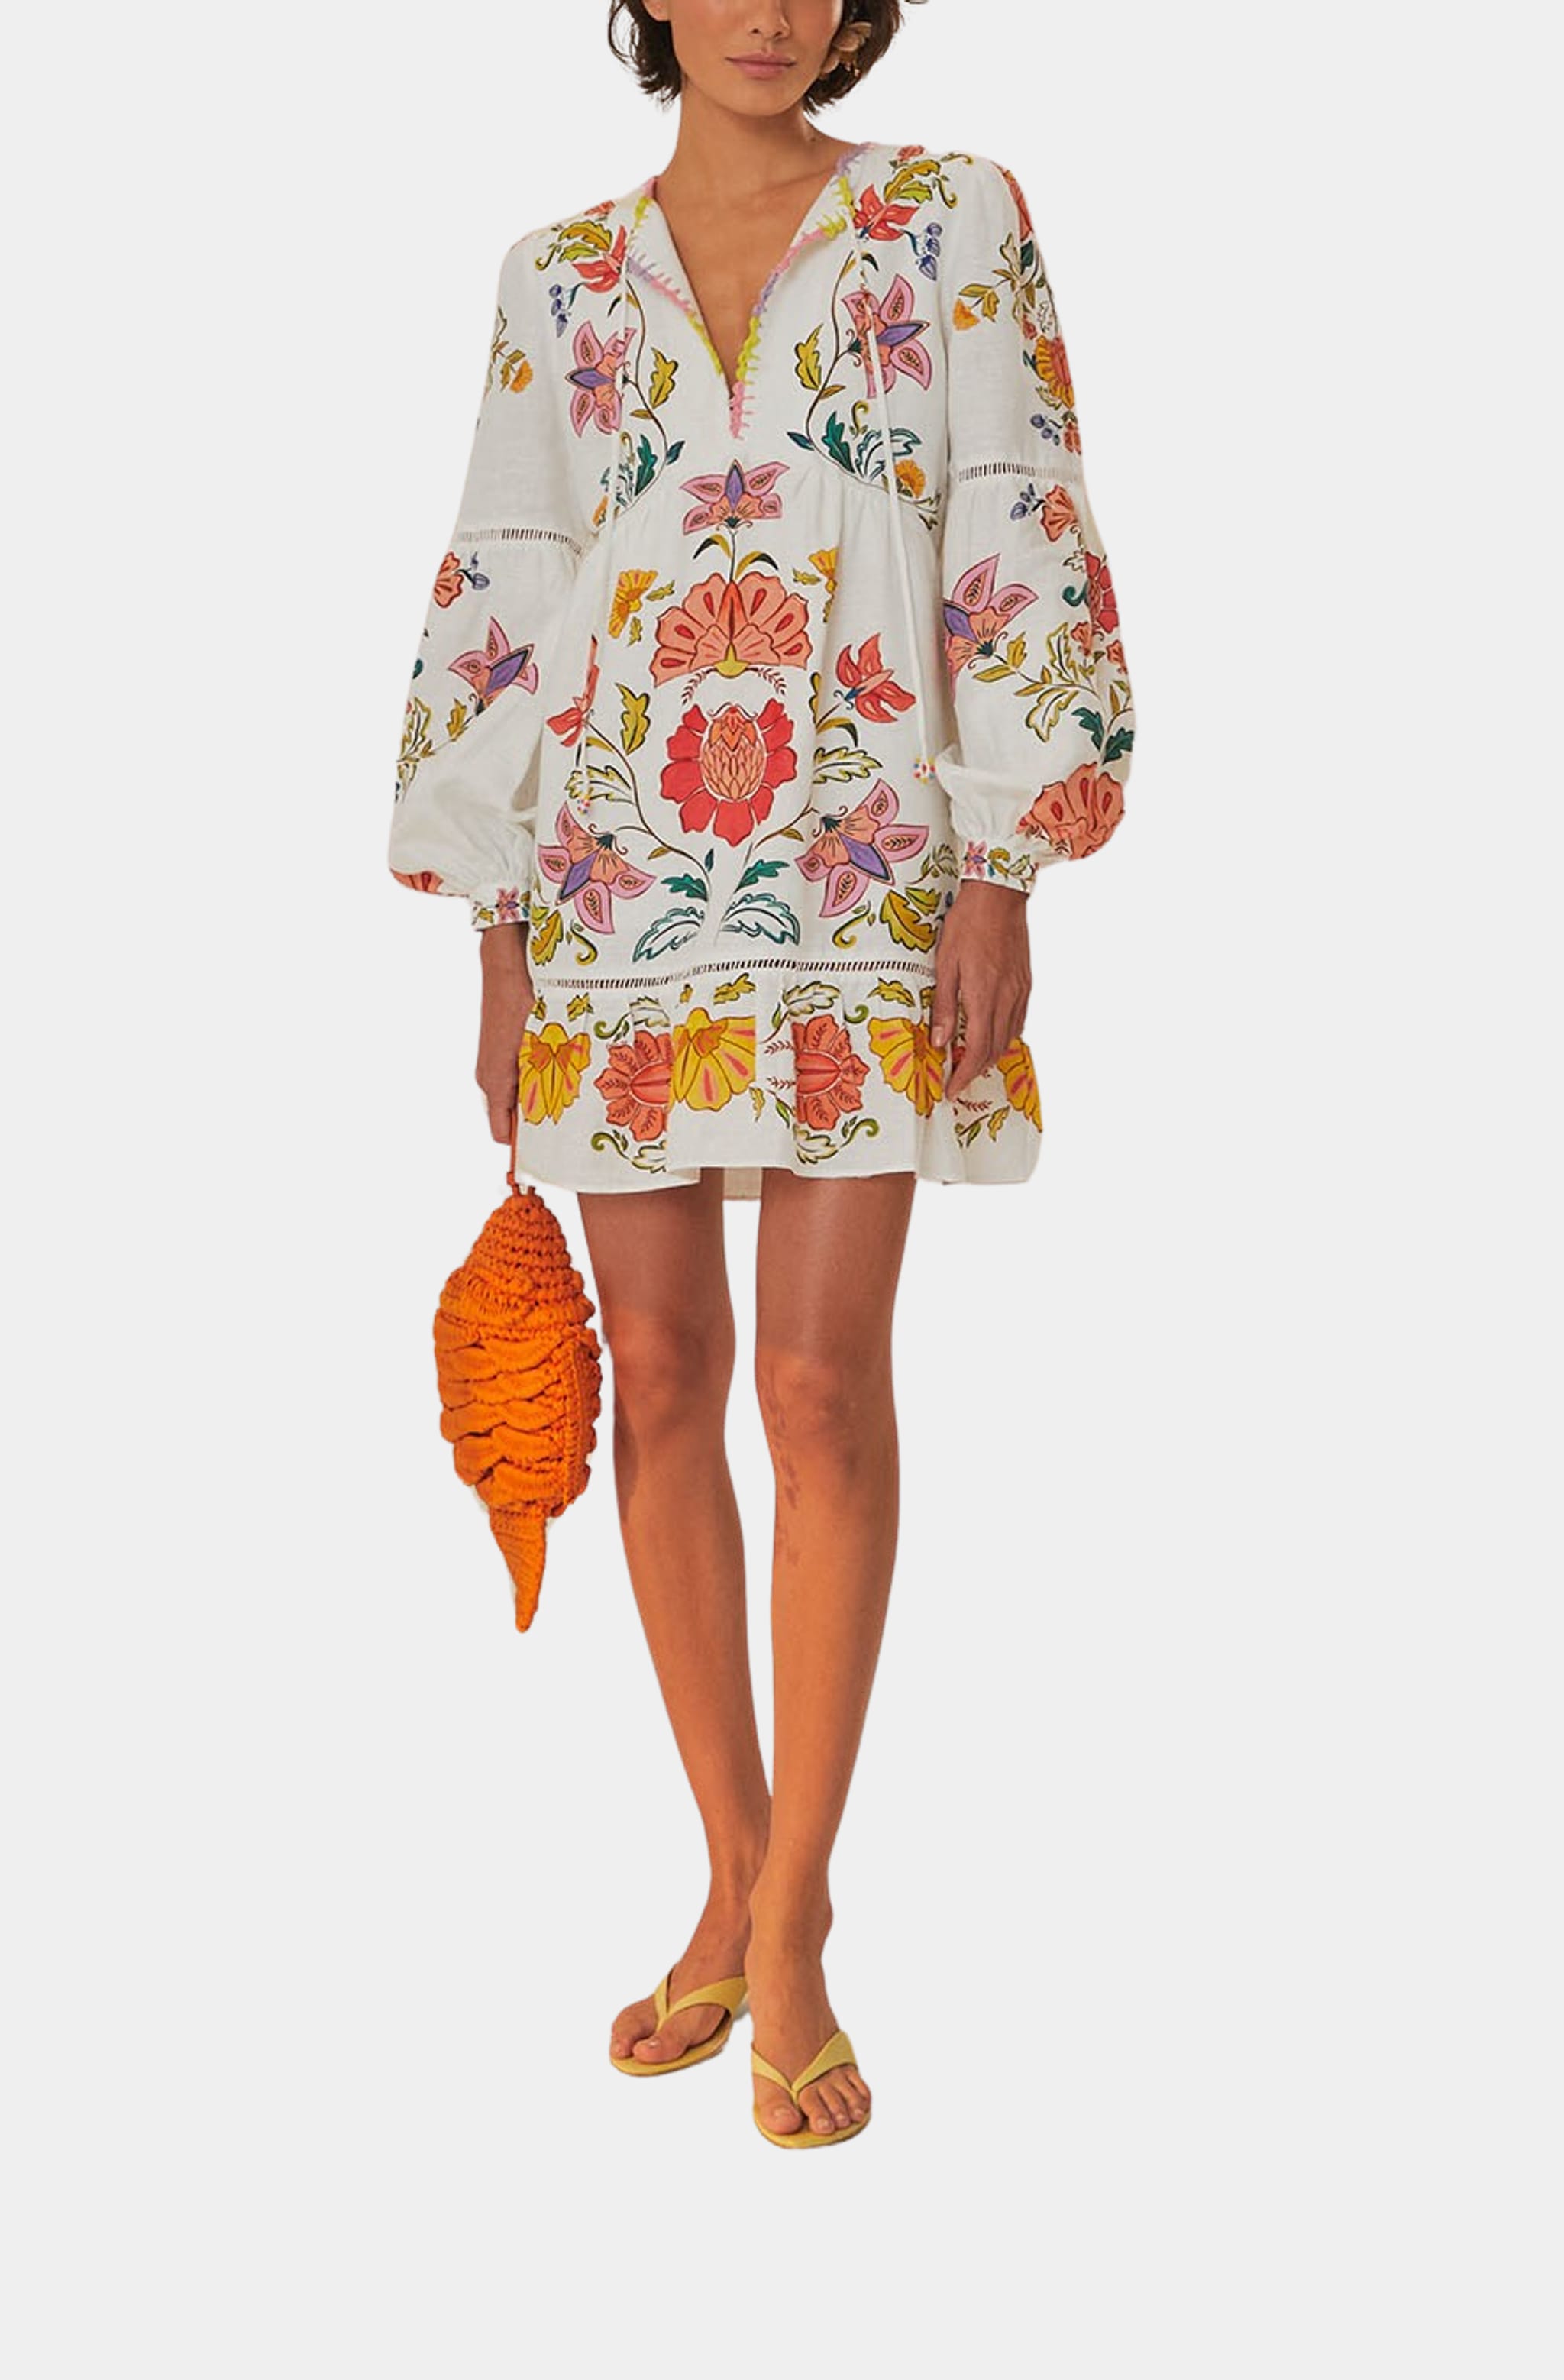 Floral Insects Off-White Mini Dress